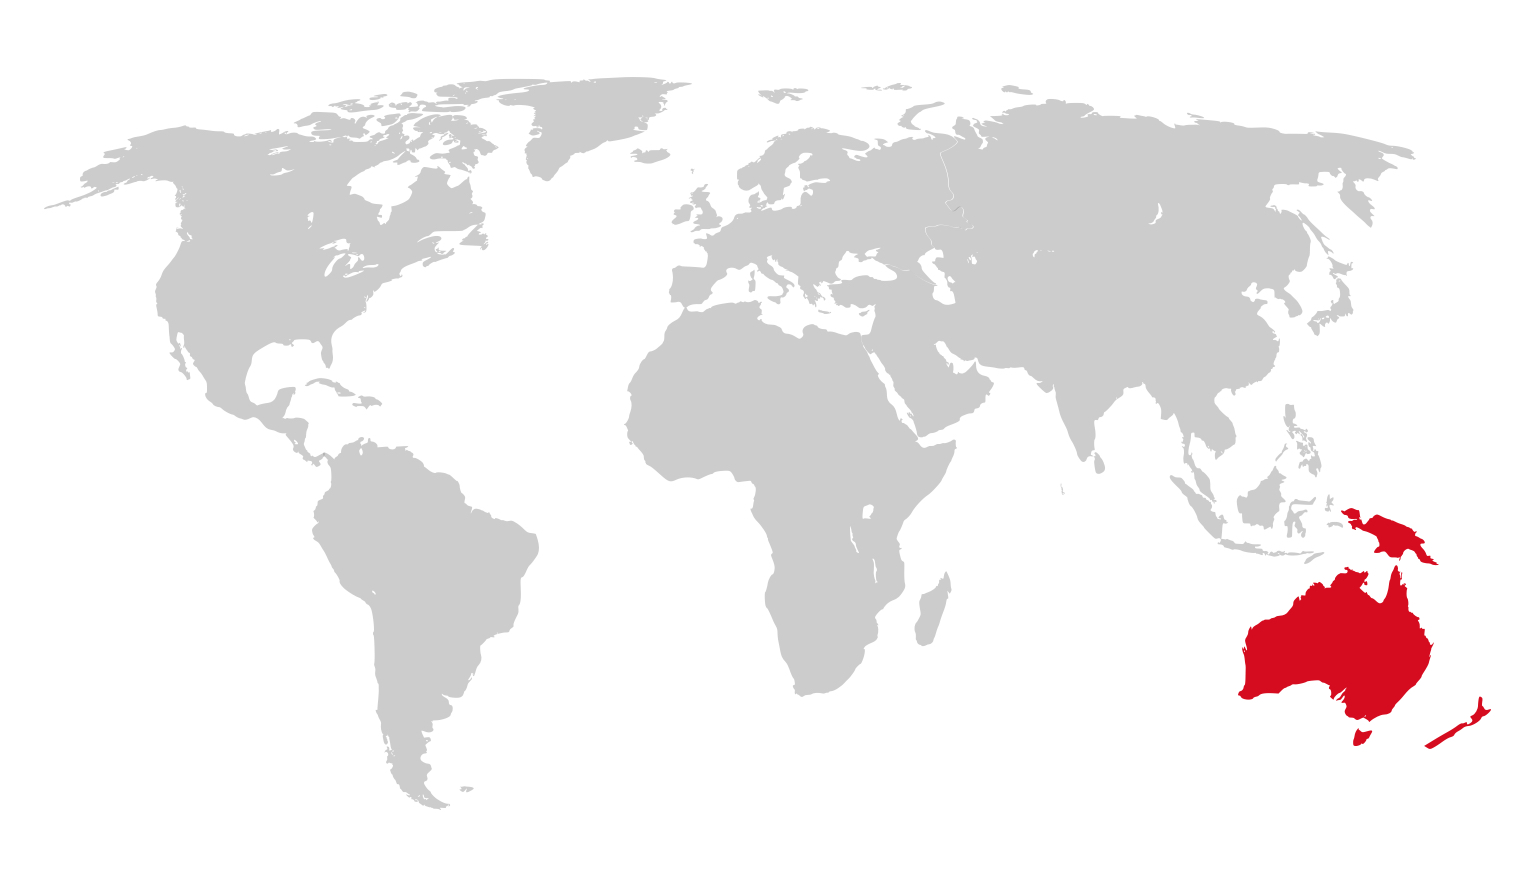 World map with Australia highlighted